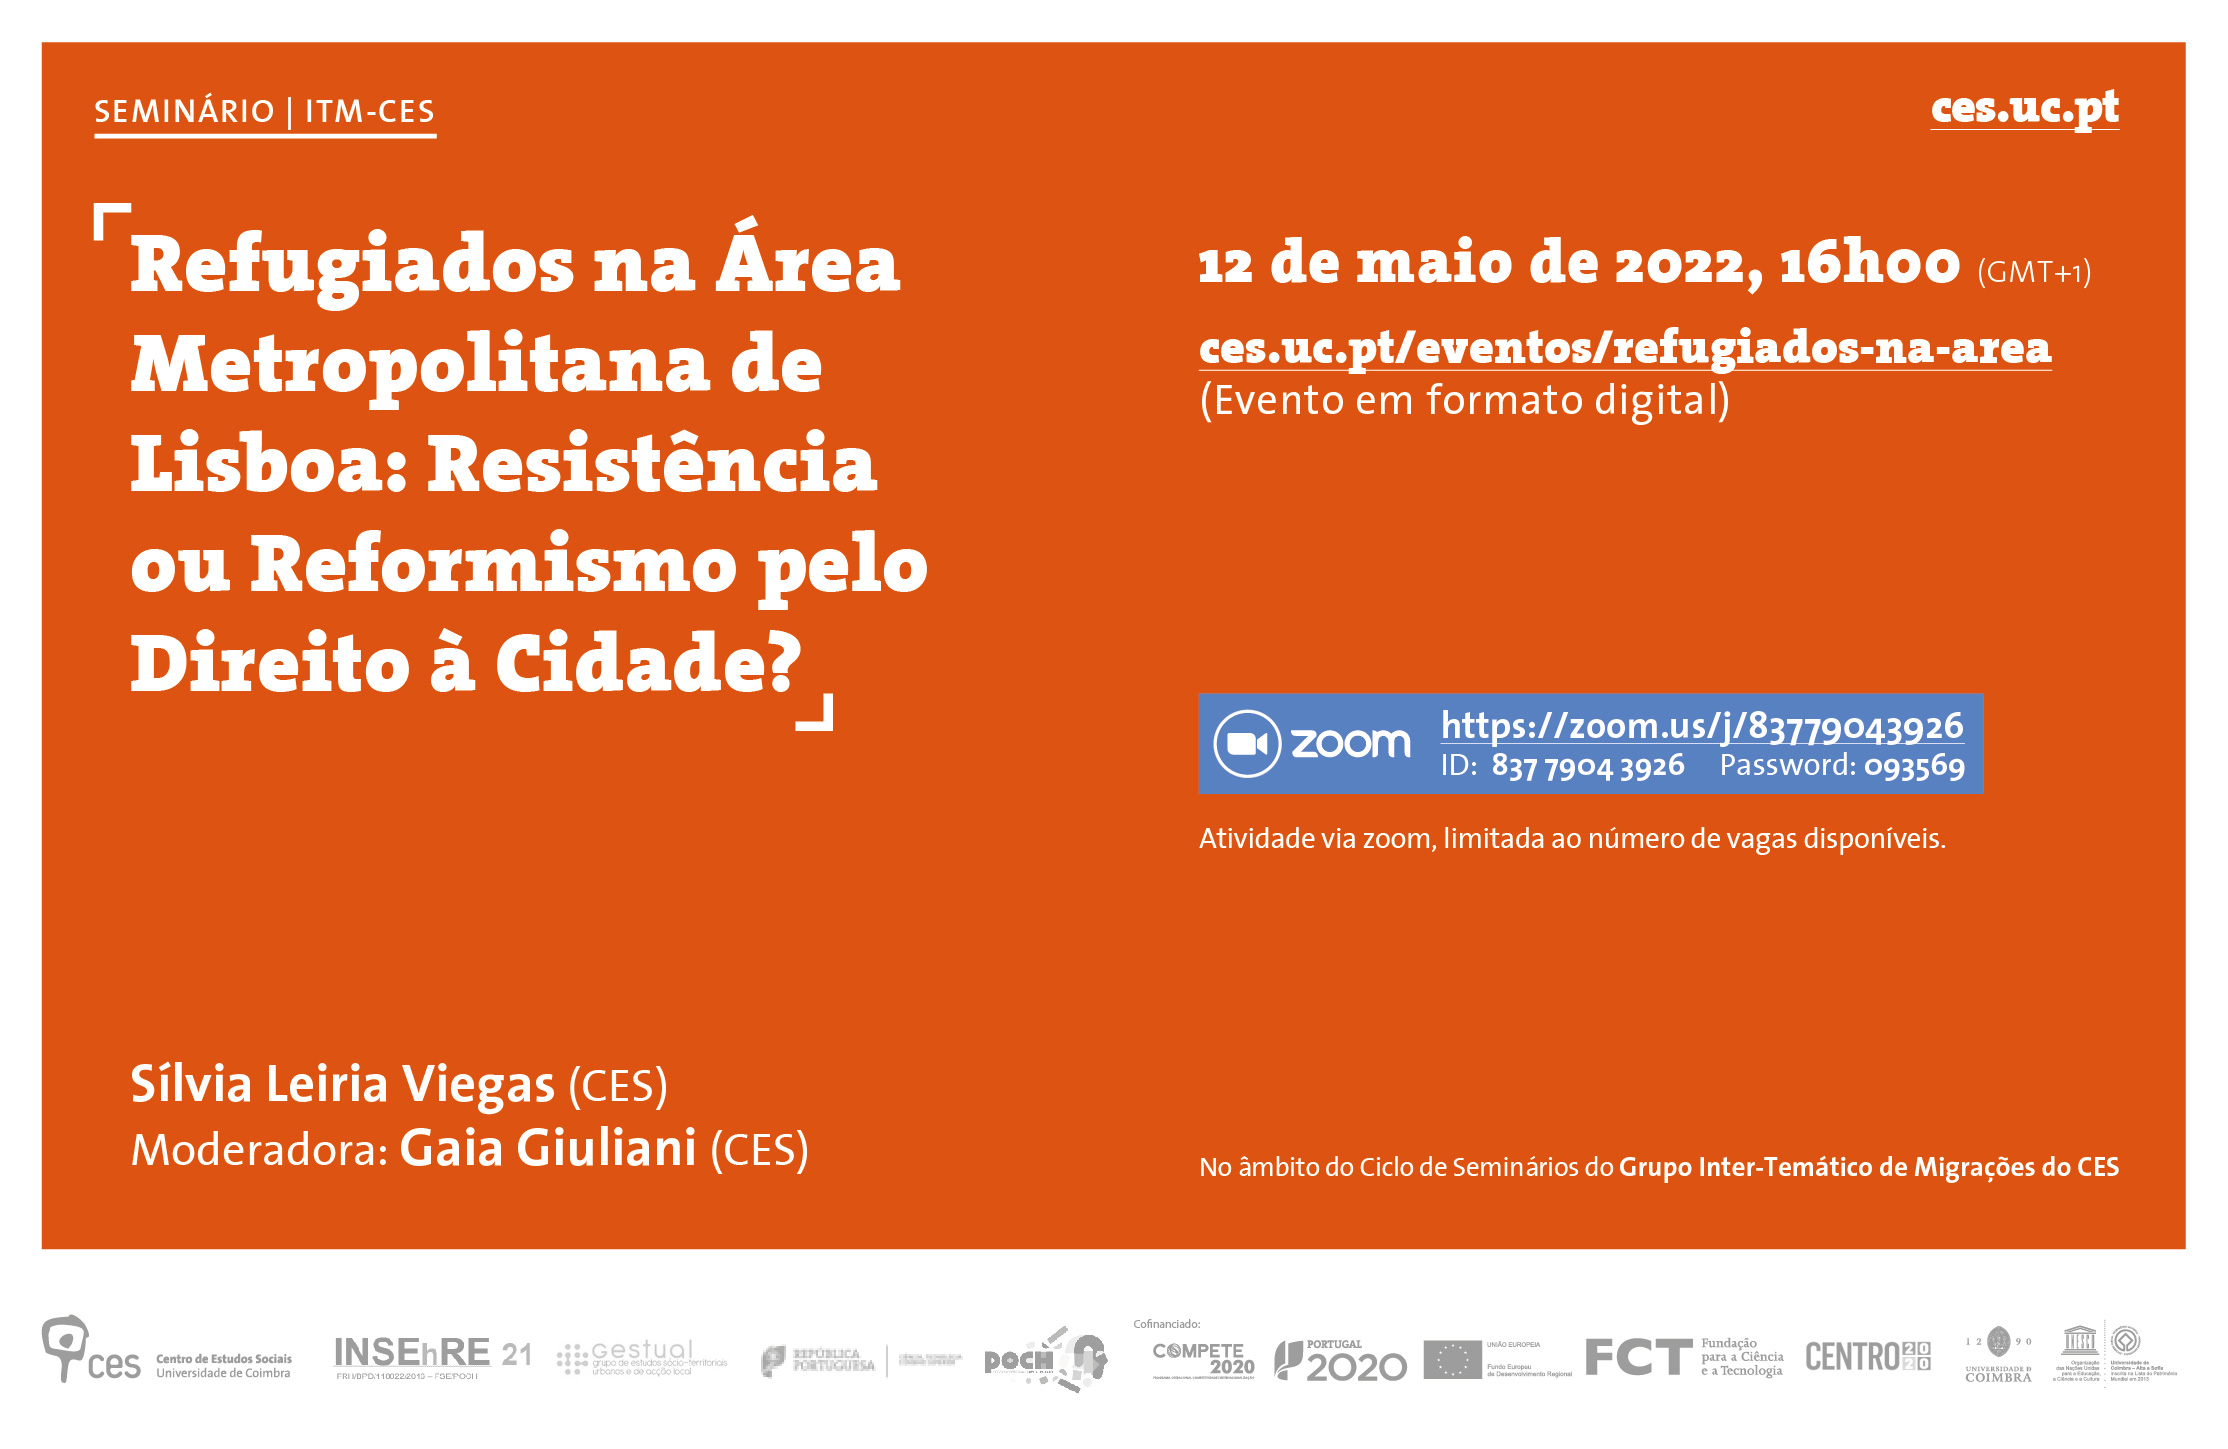 Refugees in the Lisbon Metropolitan Area: Resistance or Reformism for the Right to the City? <span id="edit_37890"><script>$(function() { $('#edit_37890').load( "/myces/user/editobj.php?tipo=evento&id=37890" ); });</script></span>